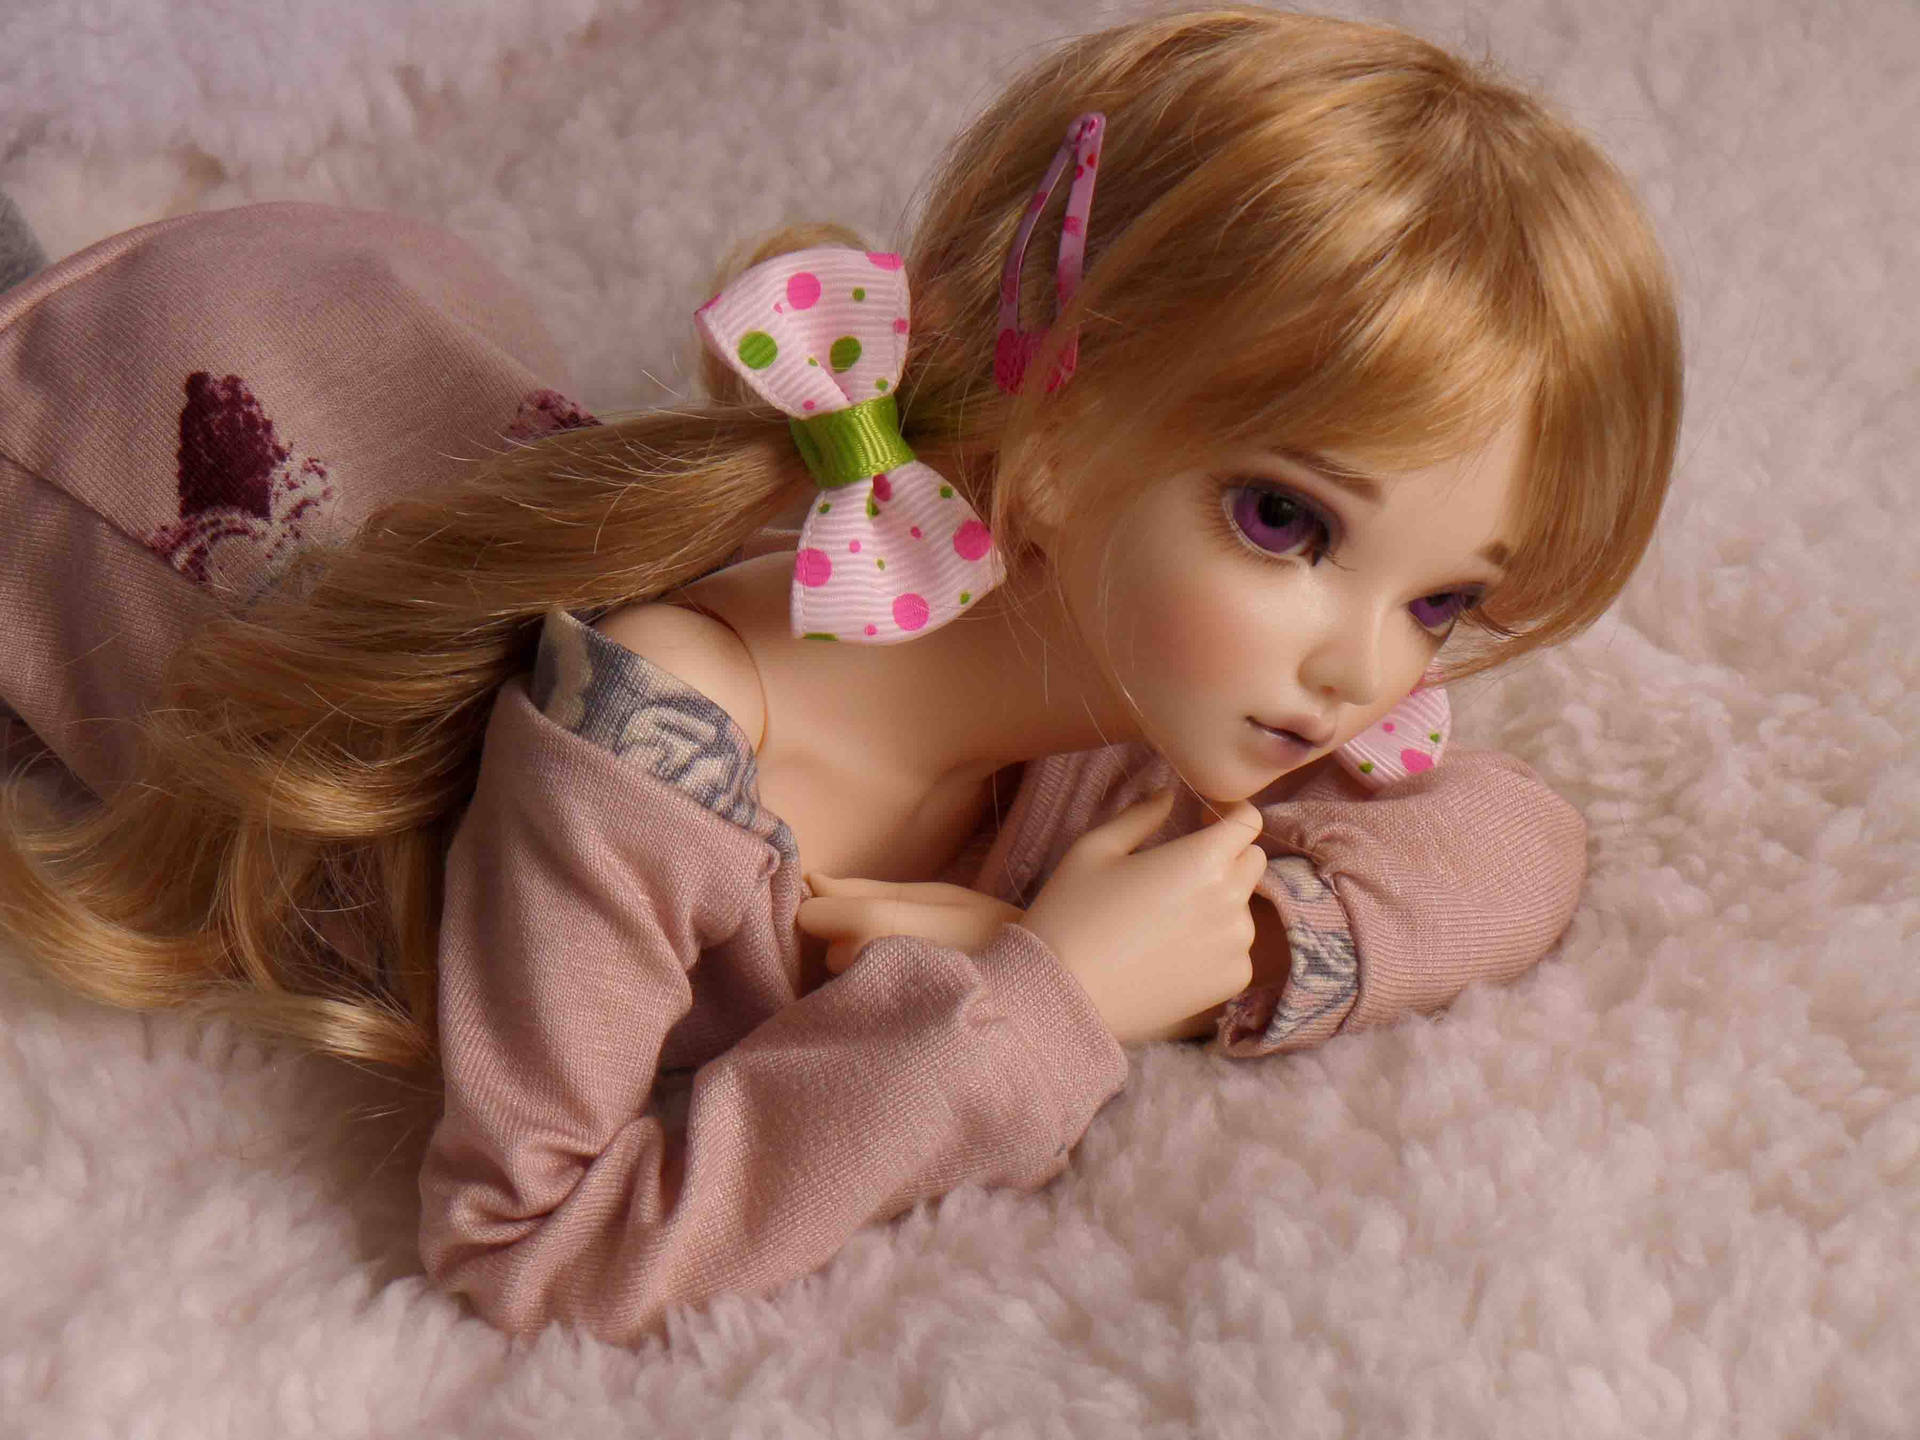 Barbie Doll In Pigtails Wallpaper